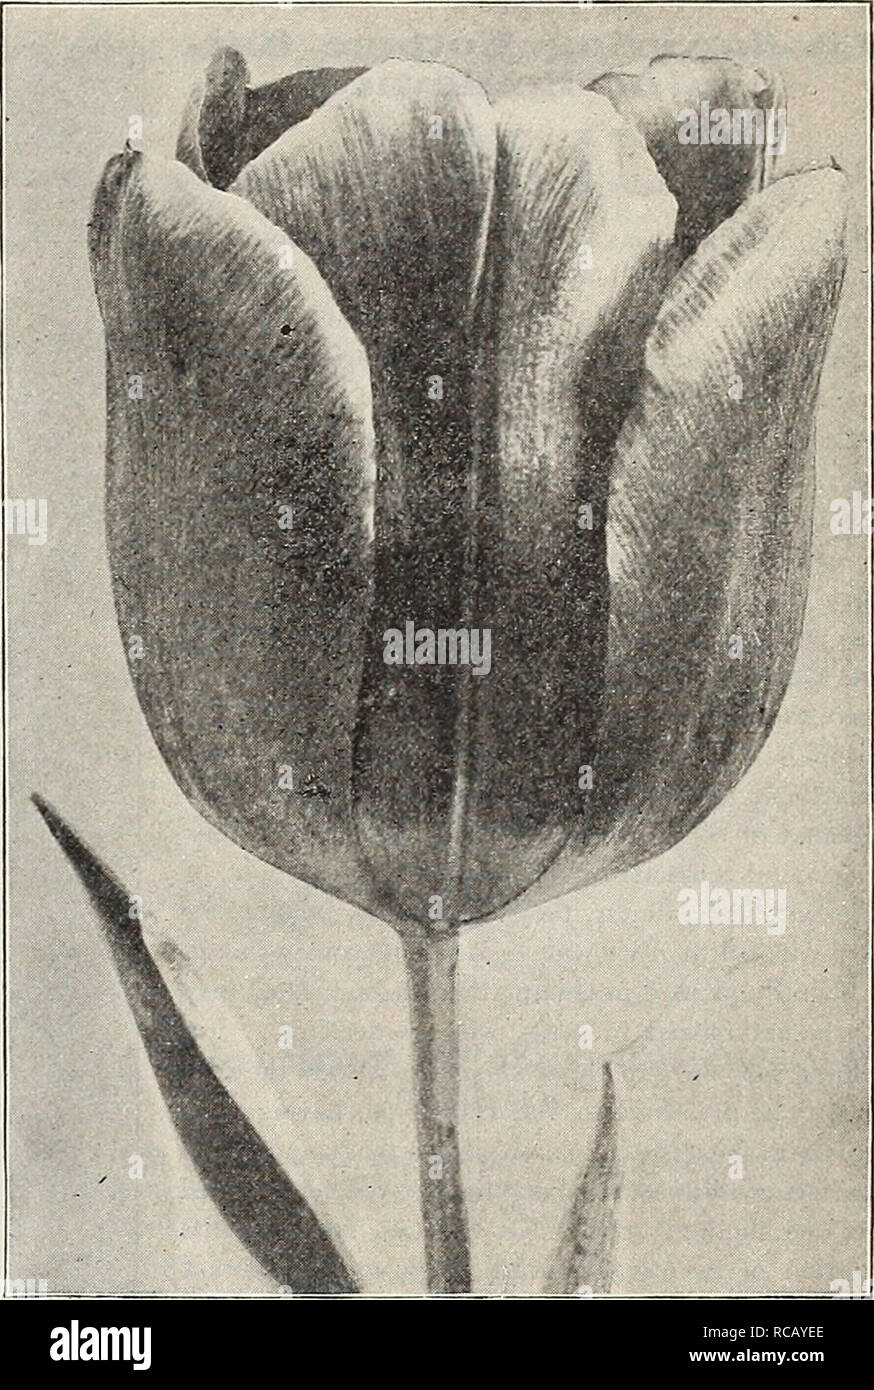 . Dreer's autumn catalogue of bulbs plants seeds etc. for autumn planting 1909. Bulbs (Plants) Catalogs; Flowers Seeds Catalogs; Gardening Equipment and supplies Catalogs; Nurseries (Horticulture) Catalogs; Fruit Seeds Catalogs; Vegetables Seeds Catalogs. Single Early Tulips Kaiser Kroon (offered on page 8/ Single Early Tulip Thos. Moore. MIXED SINGLE TULIPS. If wanted by mail, add 5 cts. per doz. to Tulips for postage. There are great differences in the various grades of mixed Tulips. As a rule they are made up by the growers in Holland out of cheap, undesirable or surplus lots, and little at Stock Photo